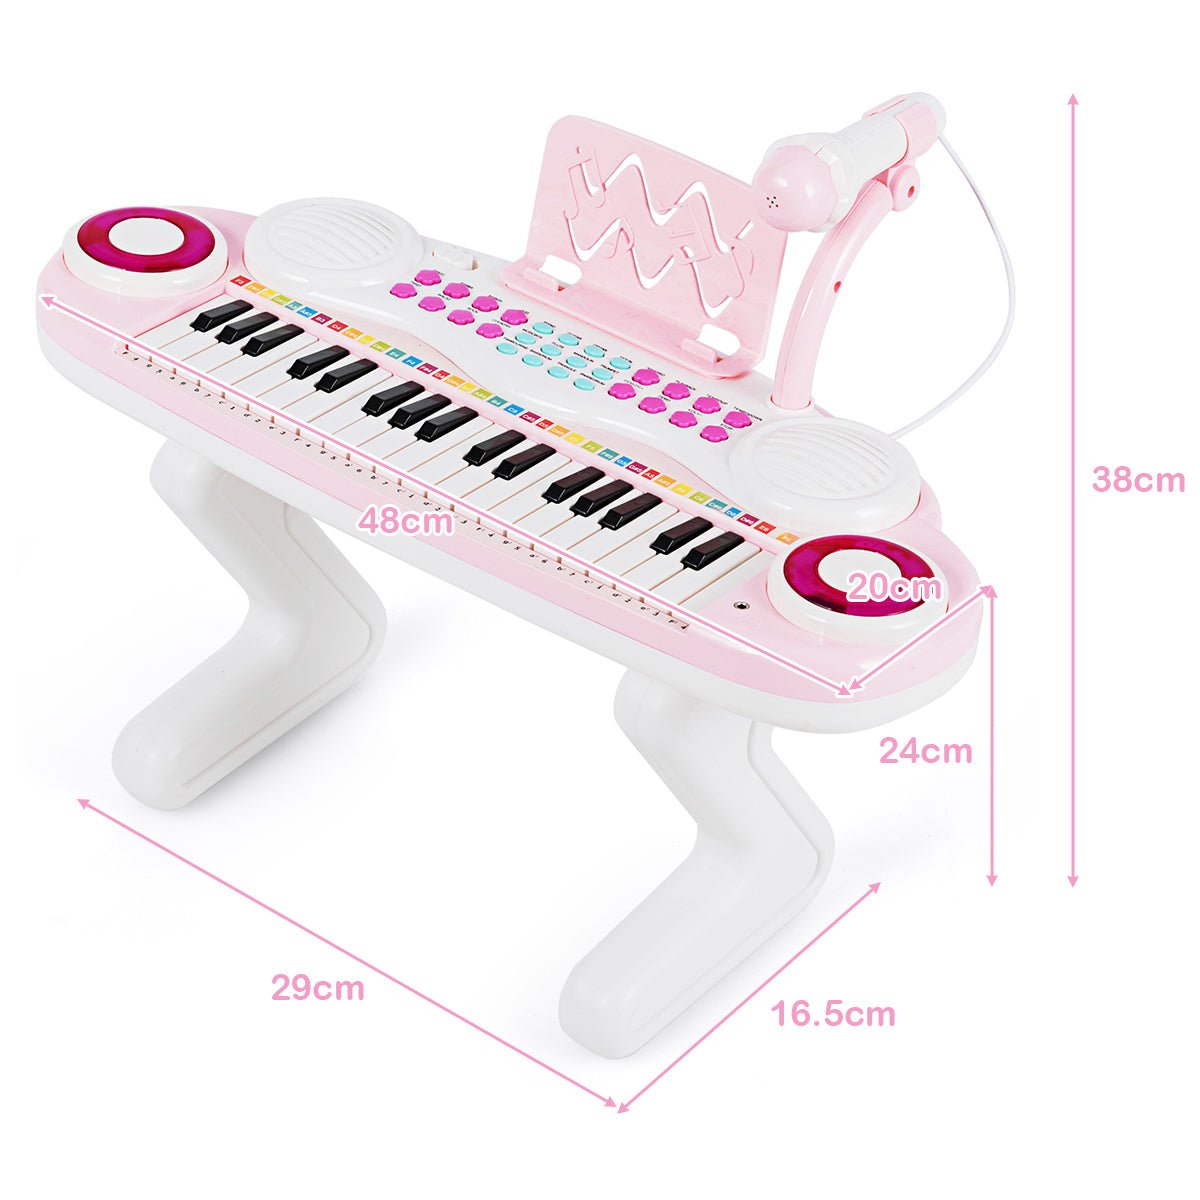 Get the Kids Pink Electronic Keyboard Piano with Microphone Today